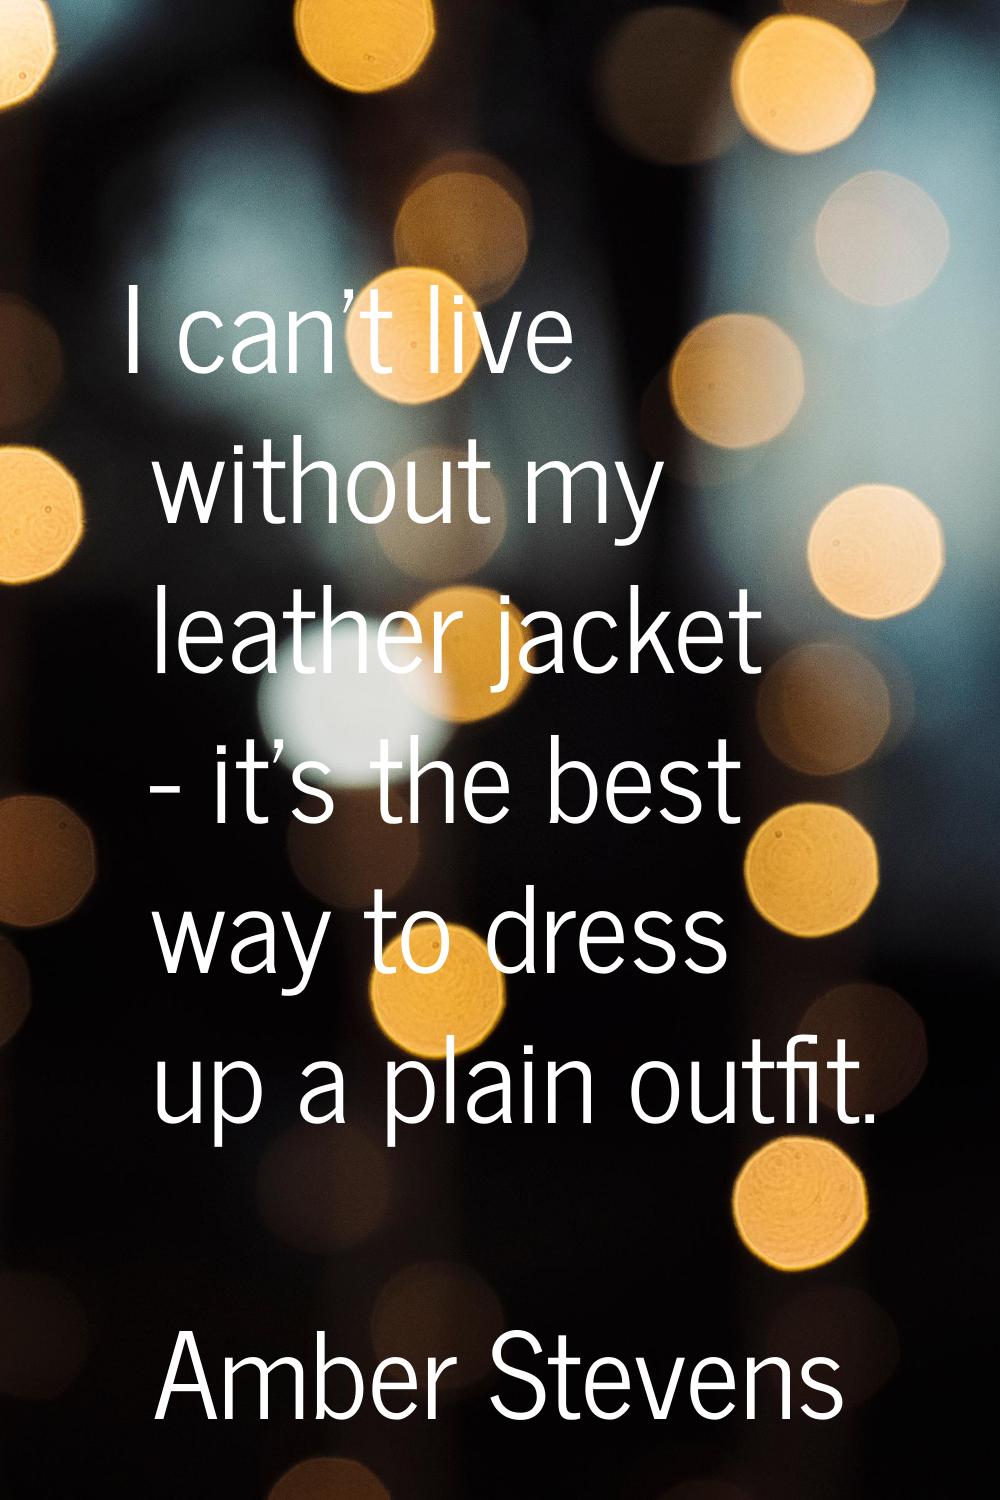 I can't live without my leather jacket - it's the best way to dress up a plain outfit.